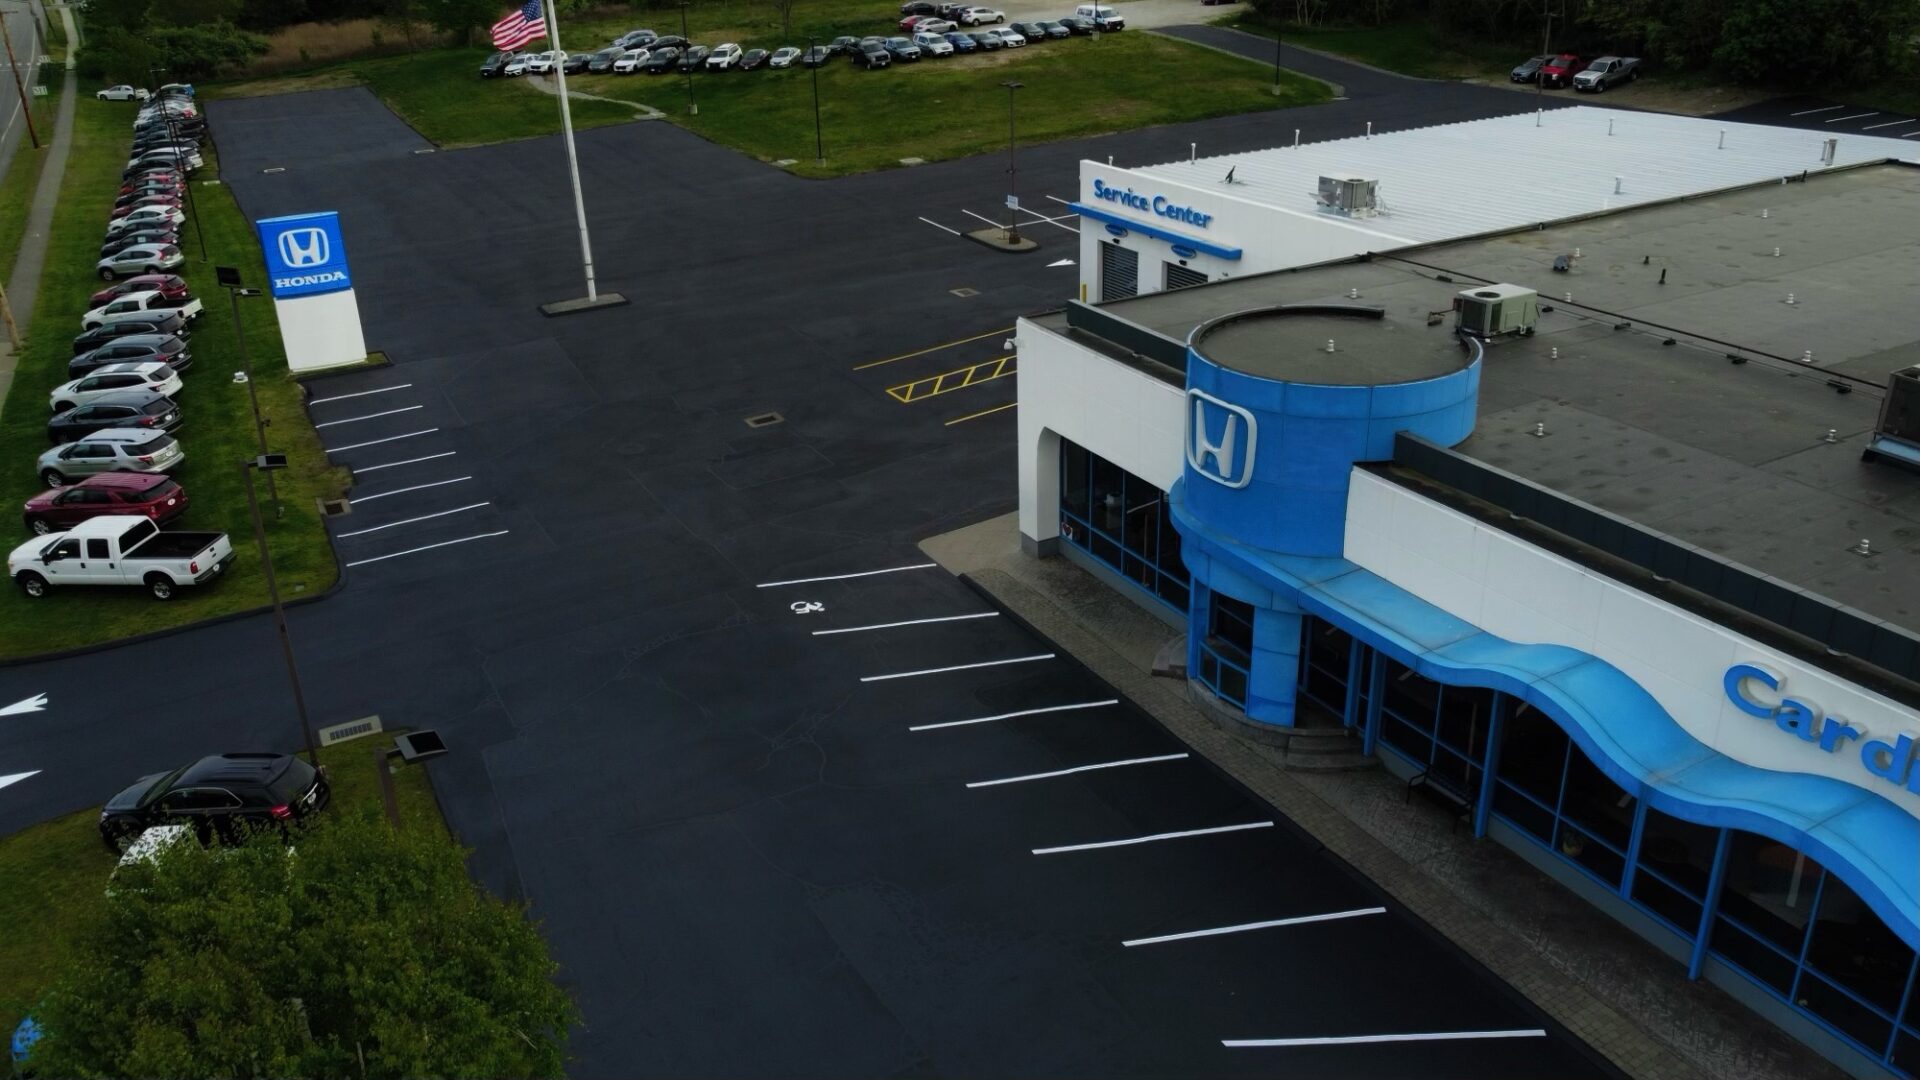 A car dealership with a blue and white building.